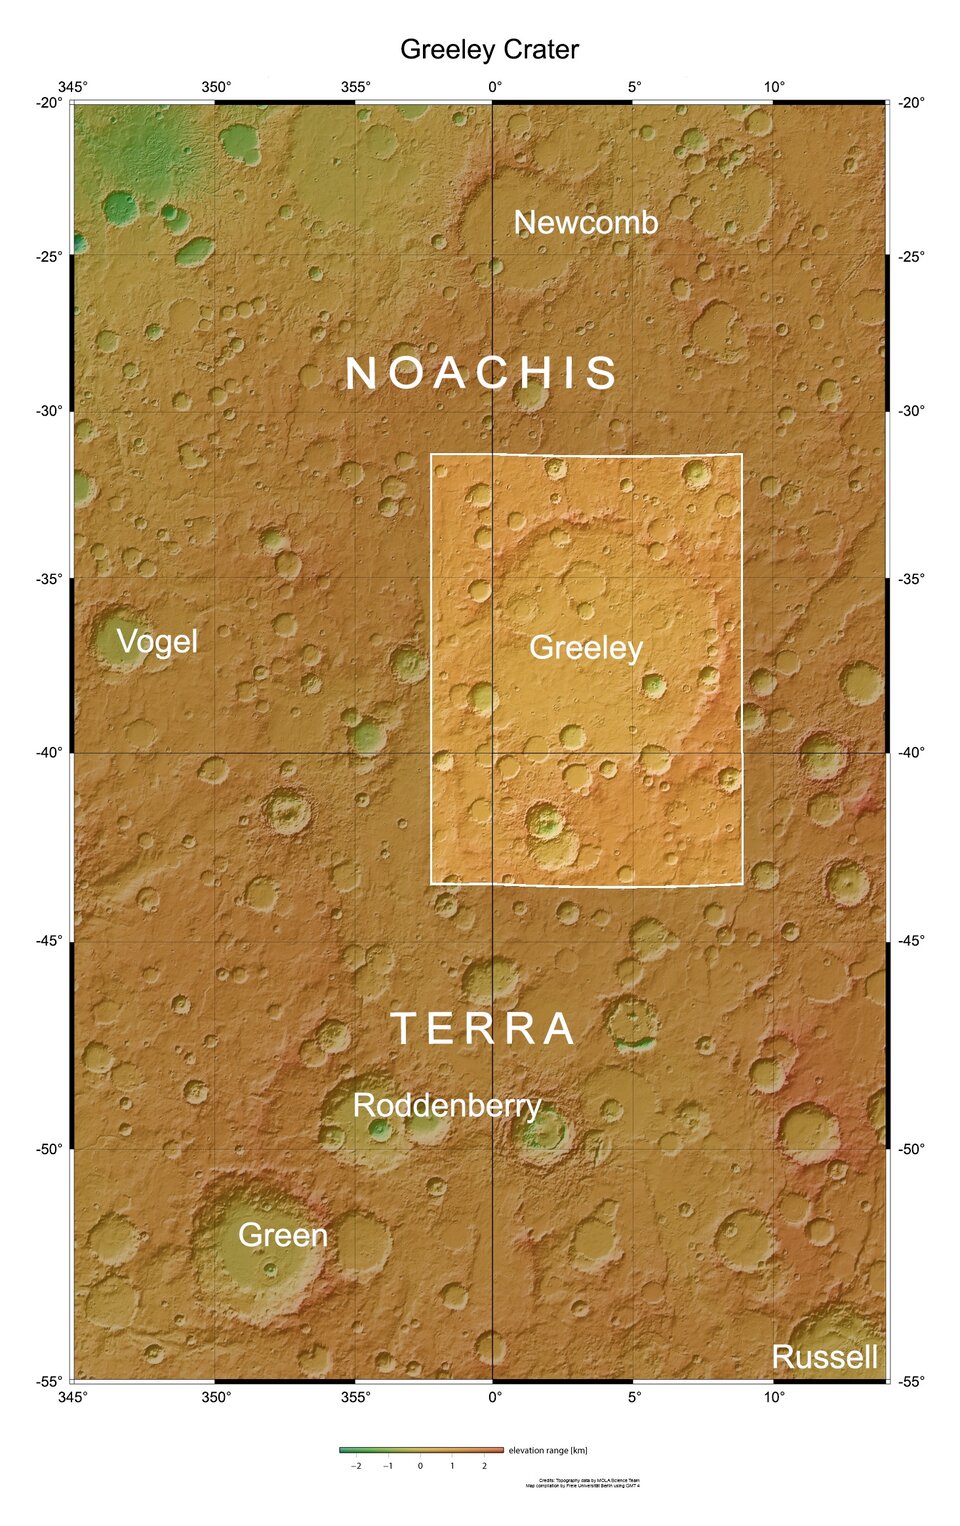 Greeley Crater in context